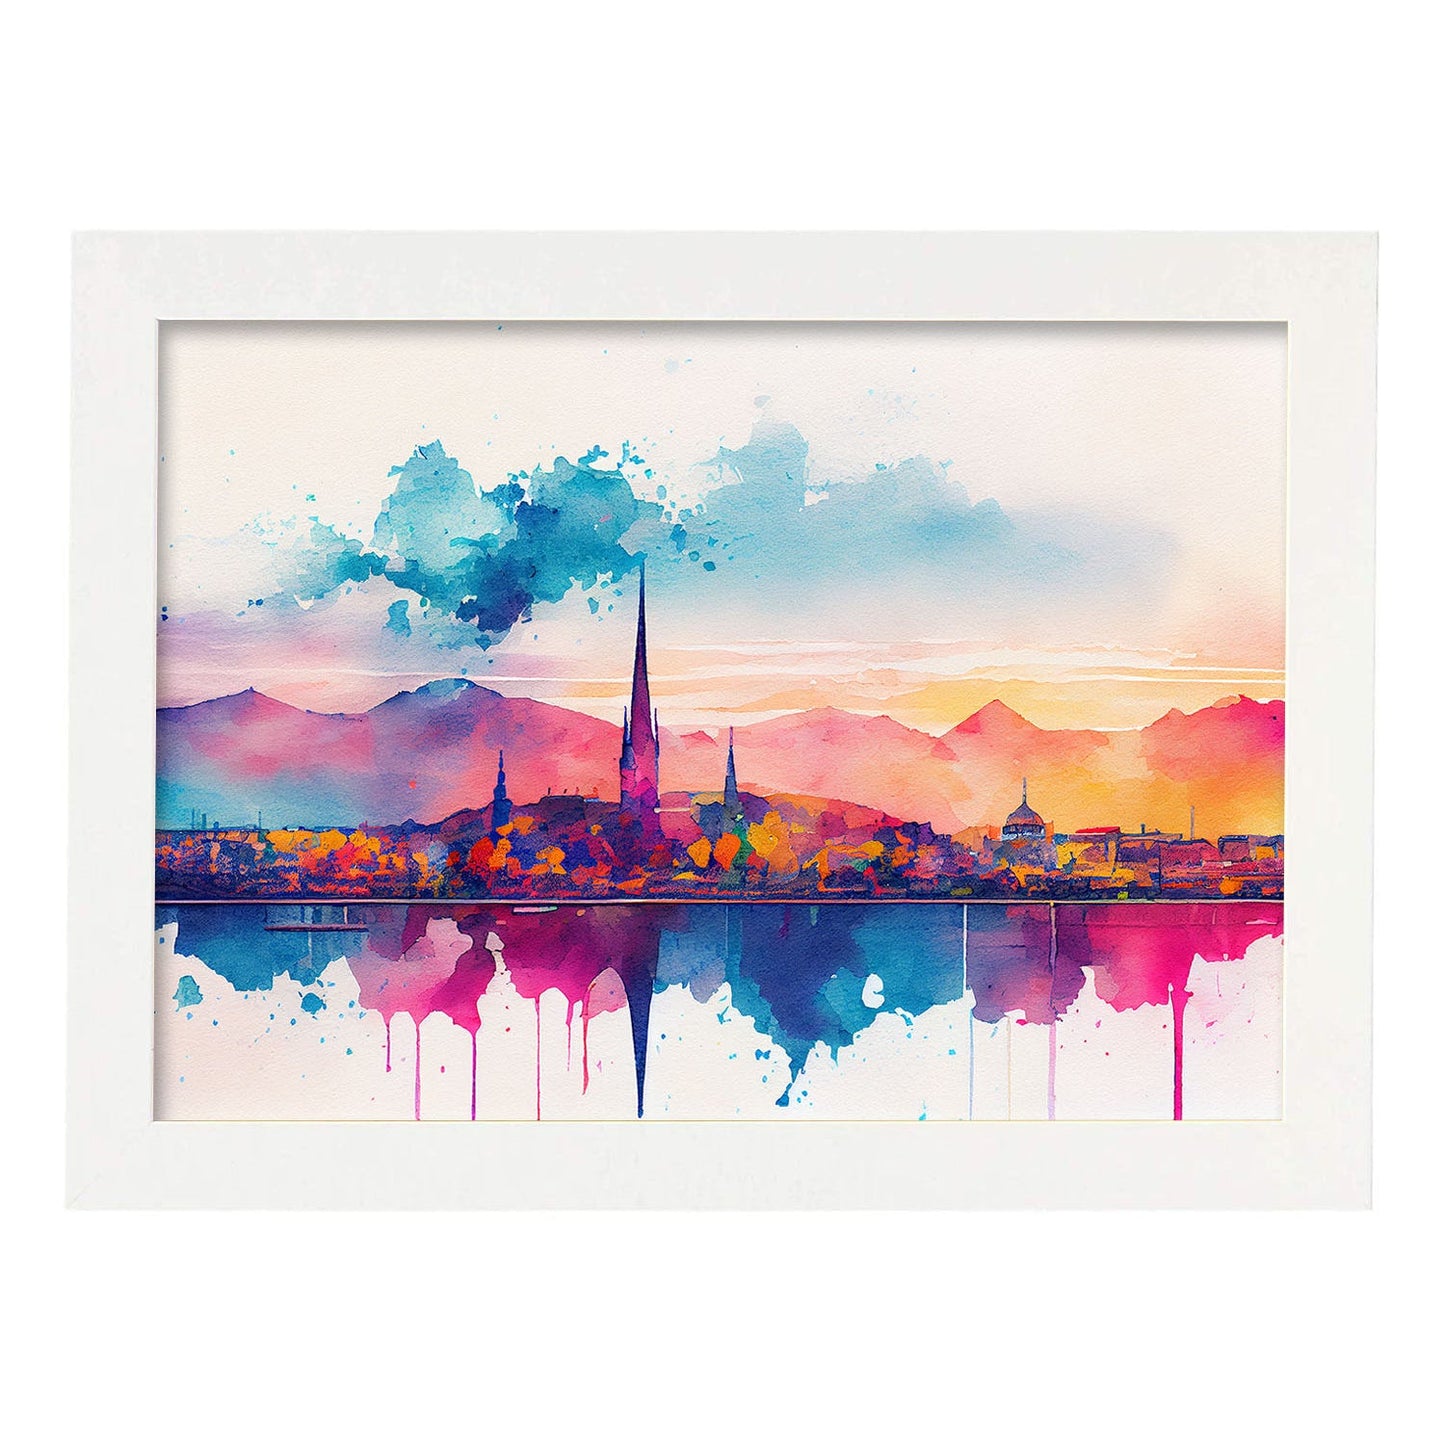 Nacnic watercolor of a skyline of the city of Geneva_1. Aesthetic Wall Art Prints for Bedroom or Living Room Design.-Artwork-Nacnic-A4-Marco Blanco-Nacnic Estudio SL